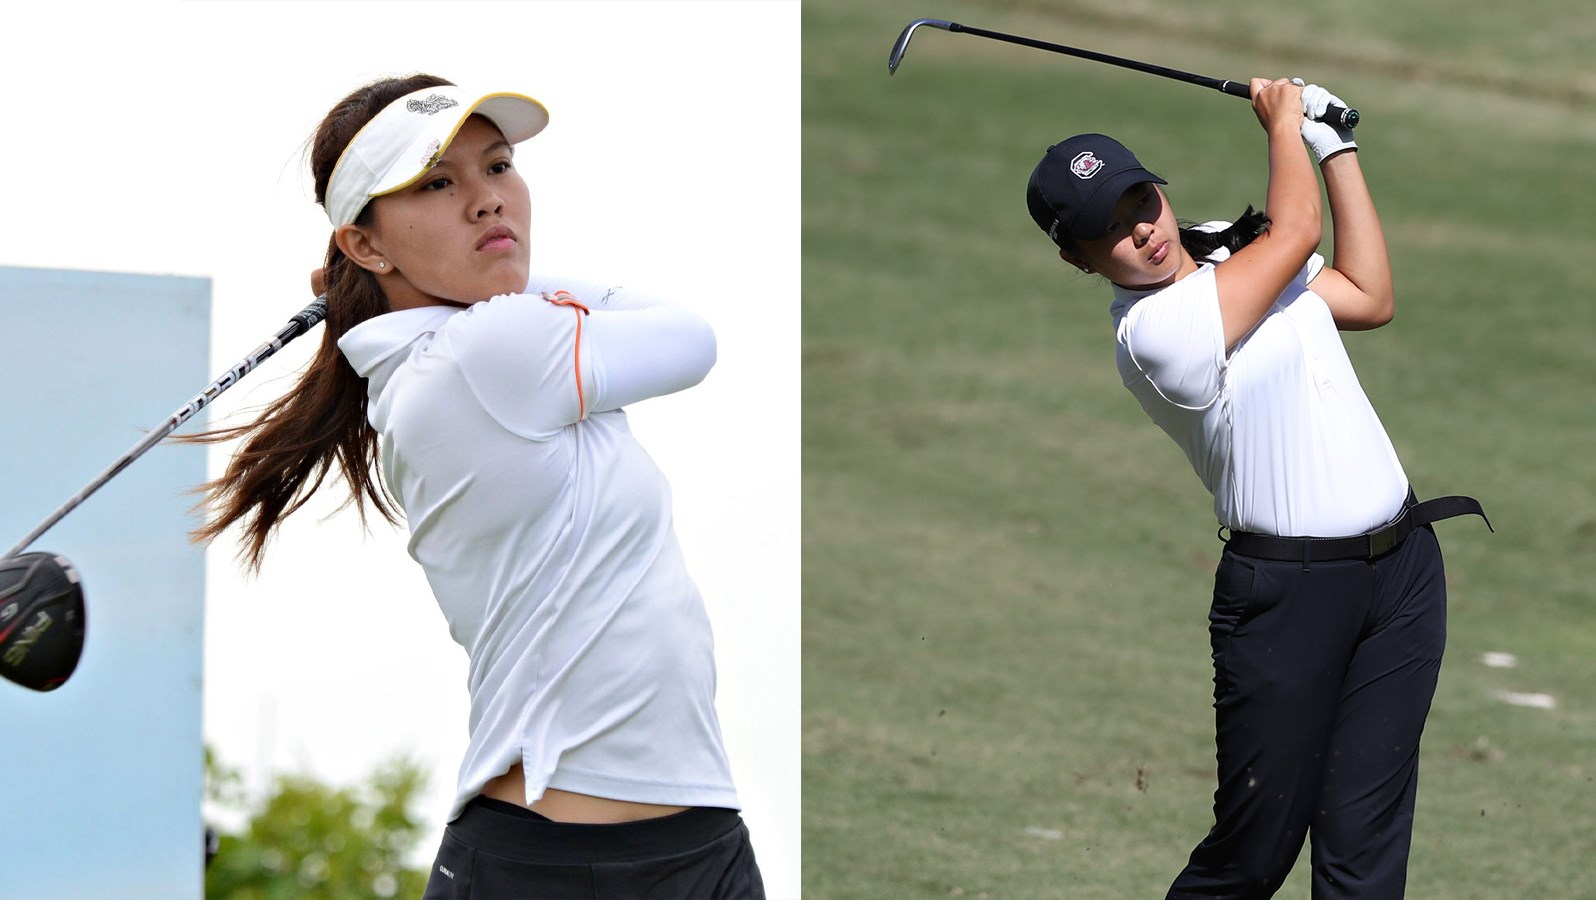 Go and Panthong Set for U.S. Women’s Amateur